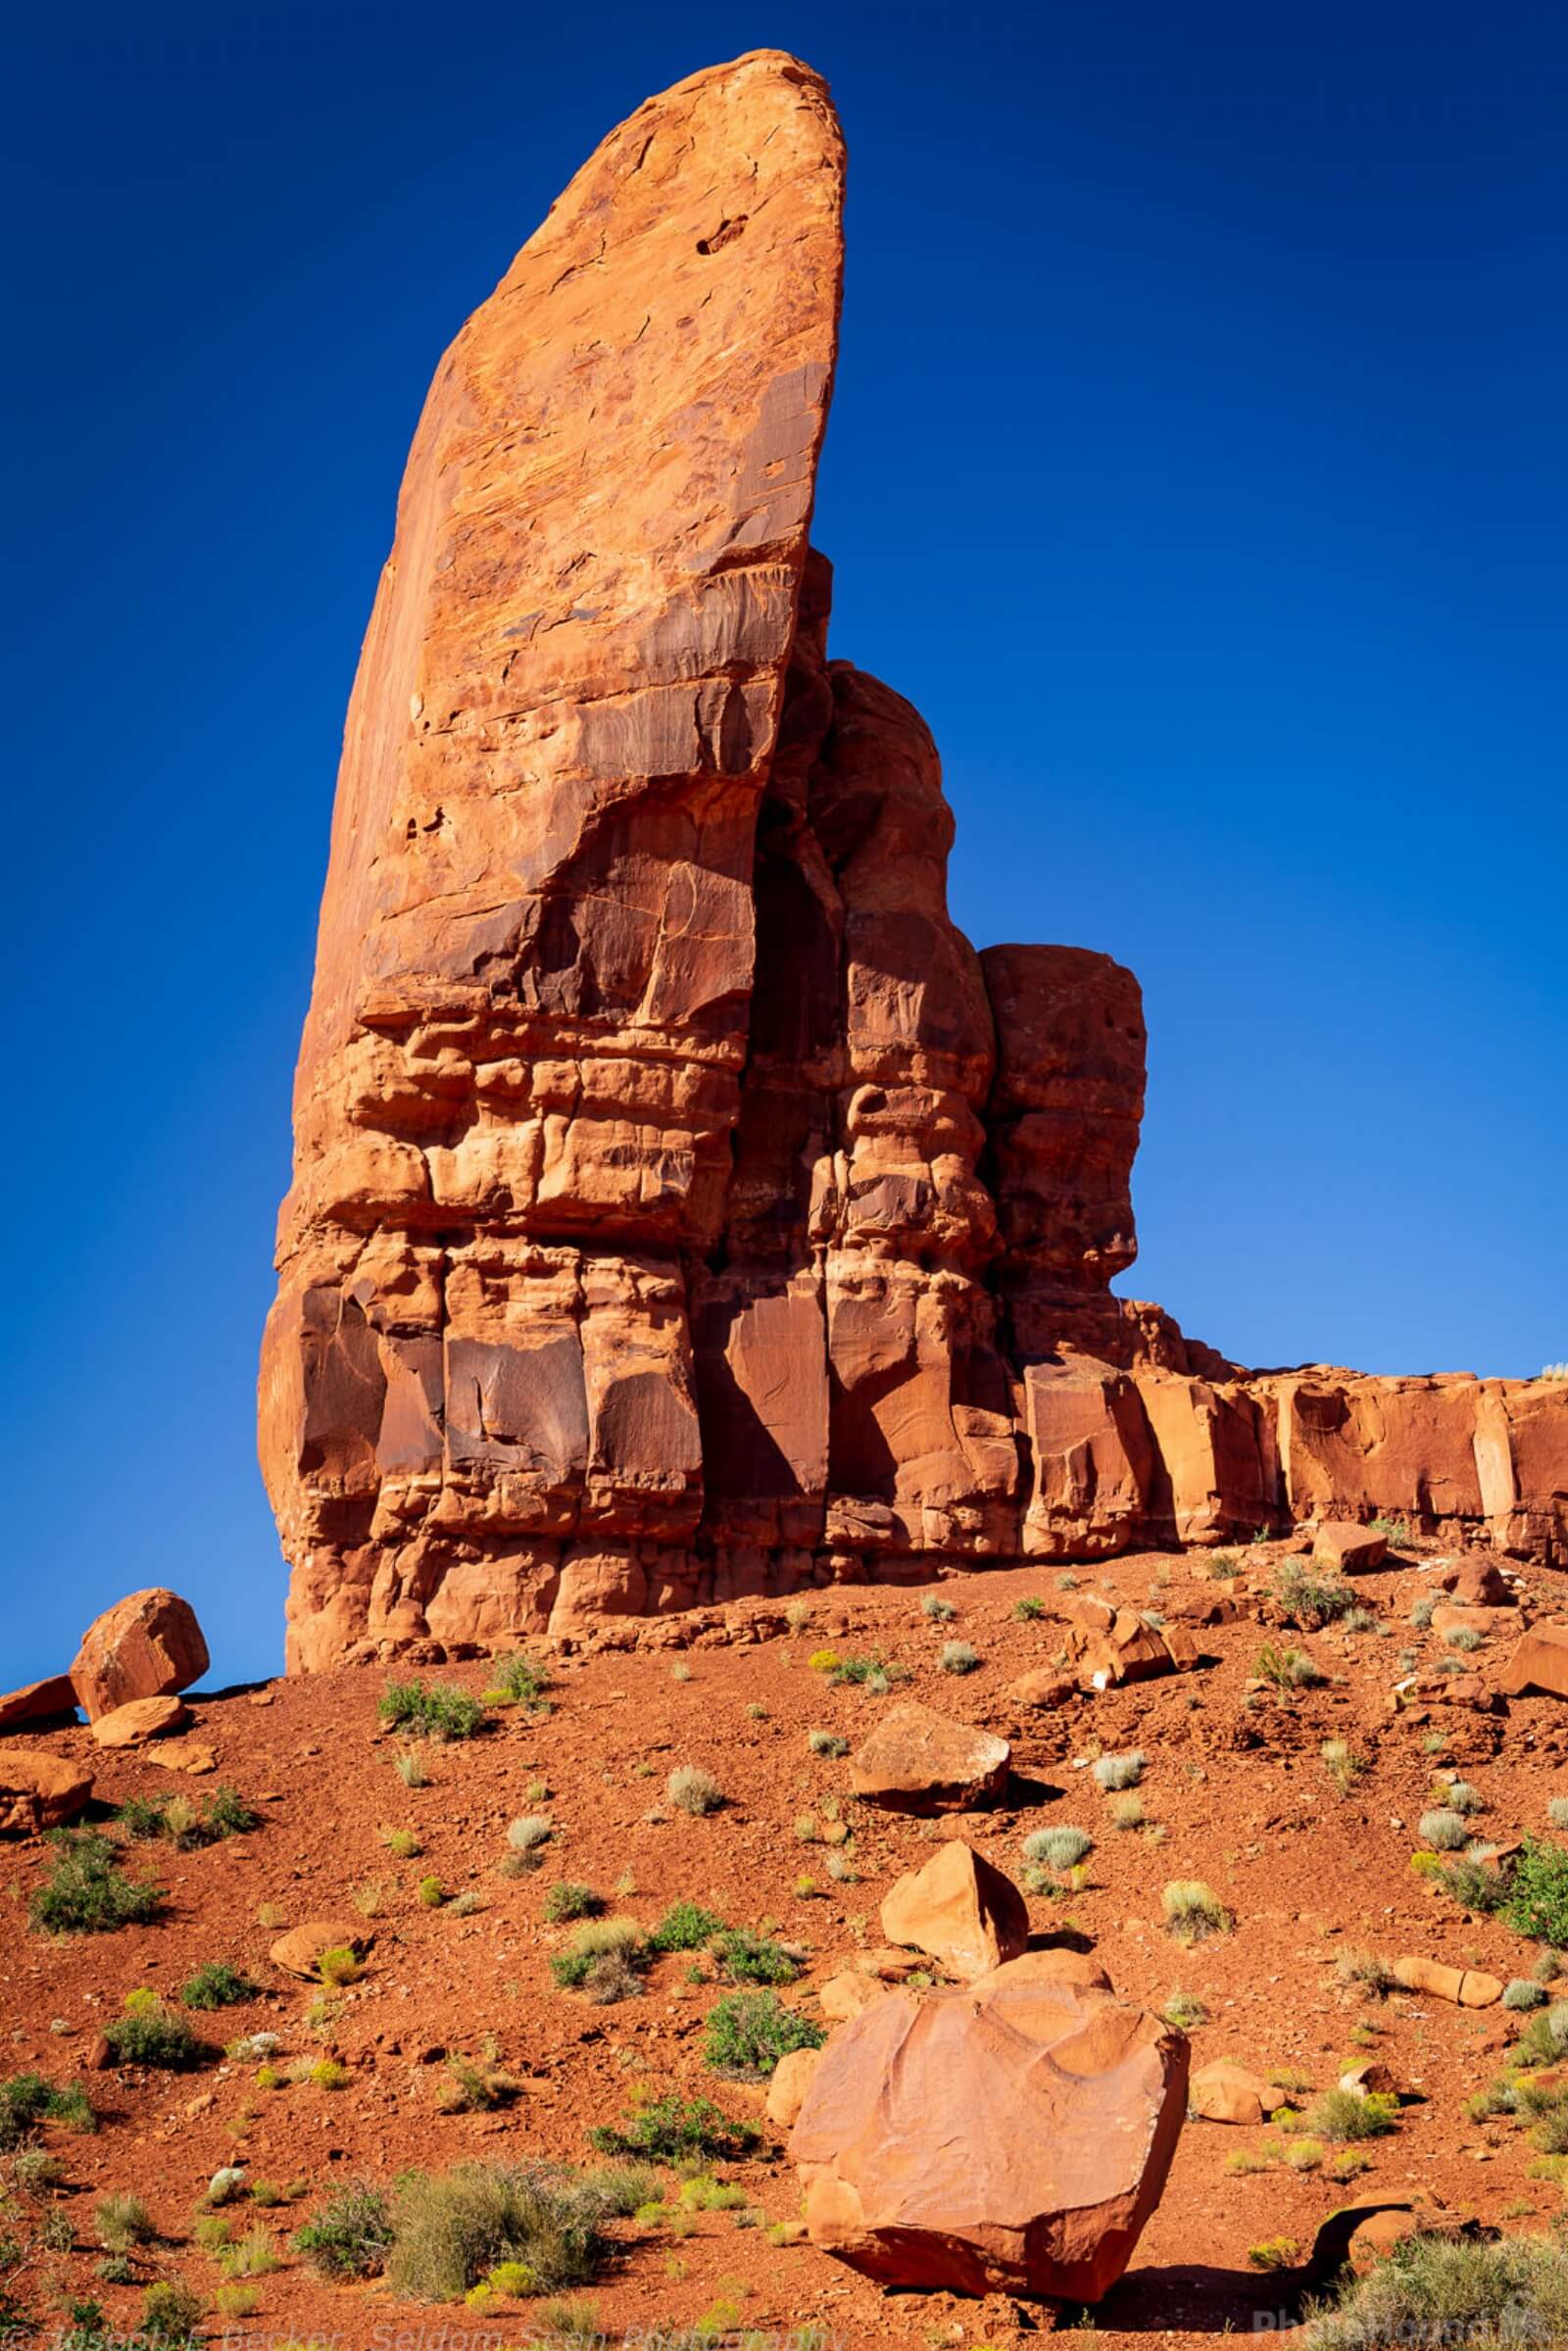 Image of The Thumb - Monument Valley by Joe Becker